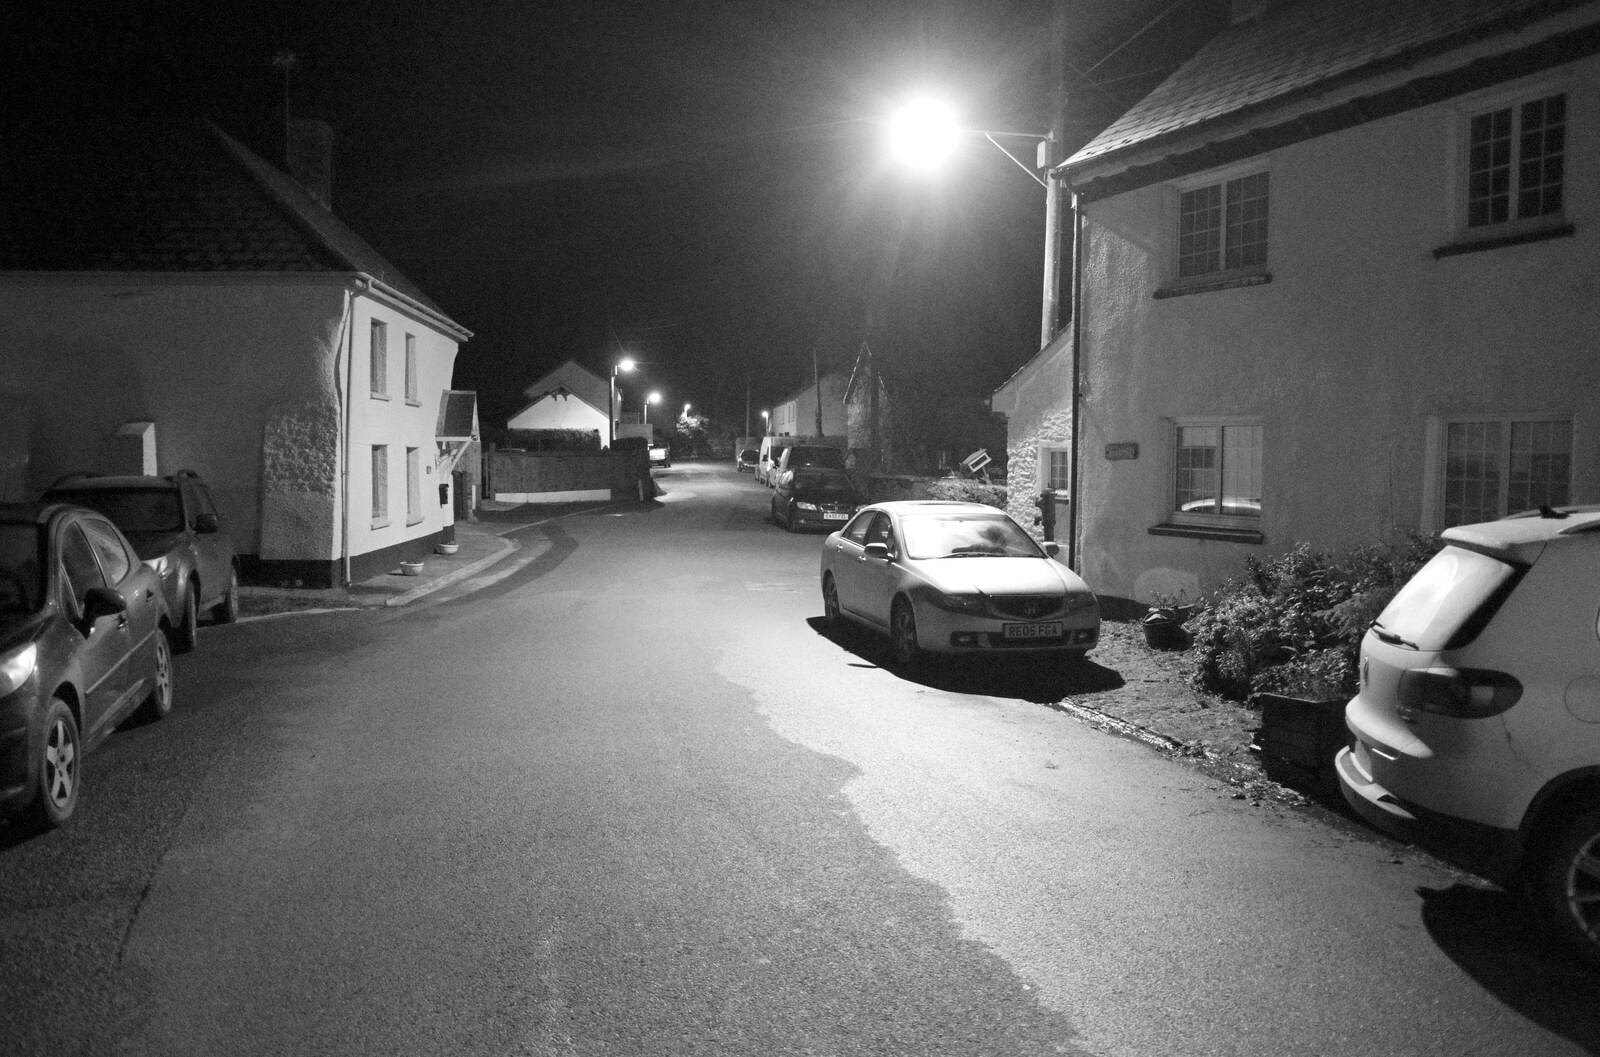 The mean streets of Spreyton, by night from A Short Trip to Spreyton, Devon - 18th January 2020